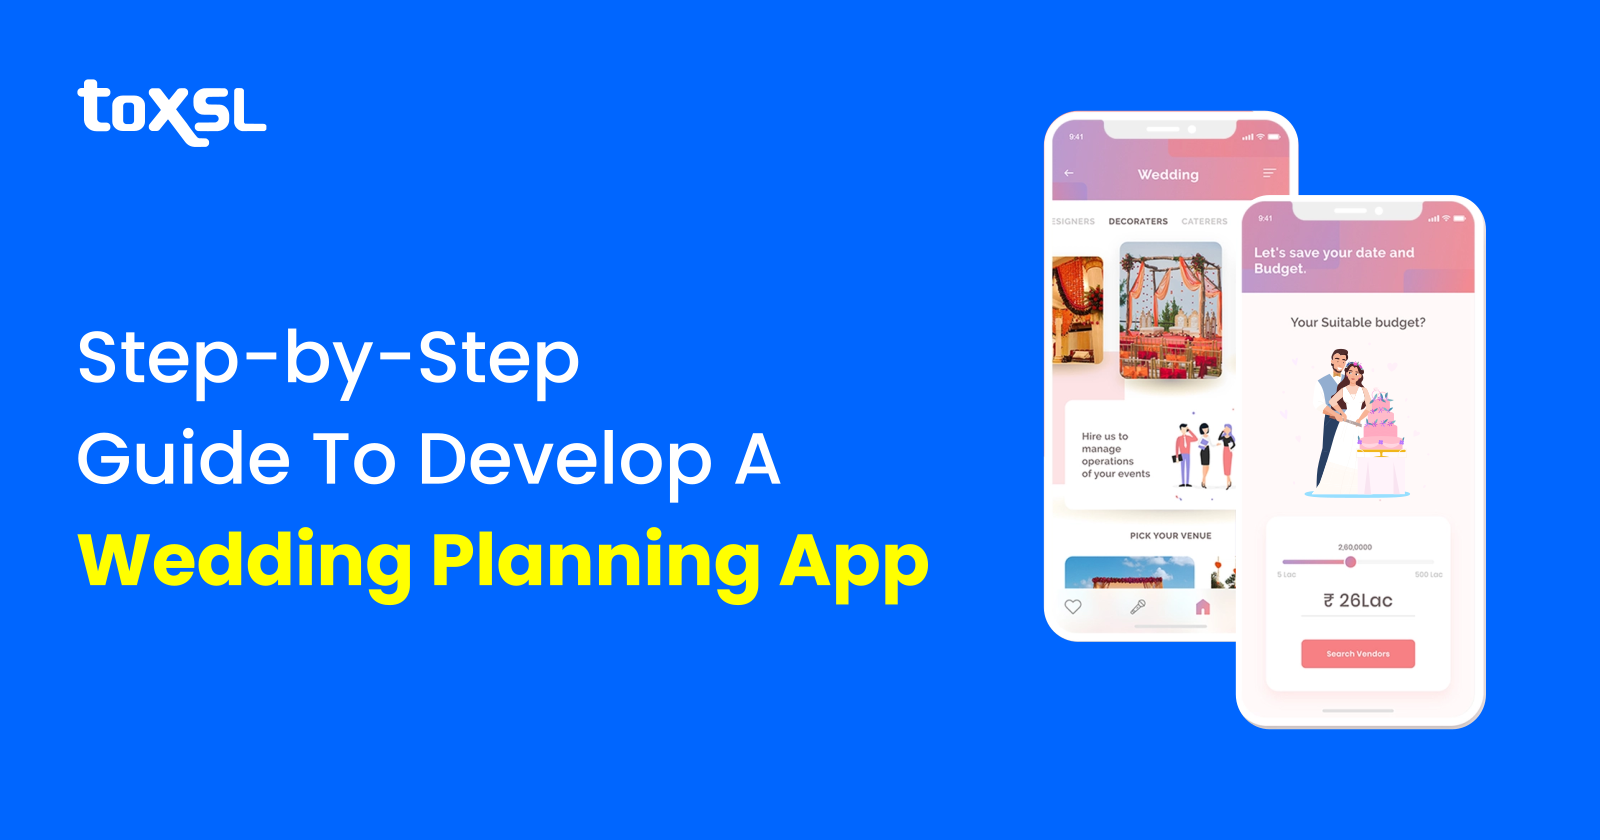 A Step-by-Step Guide To Develop A Wedding Planning App